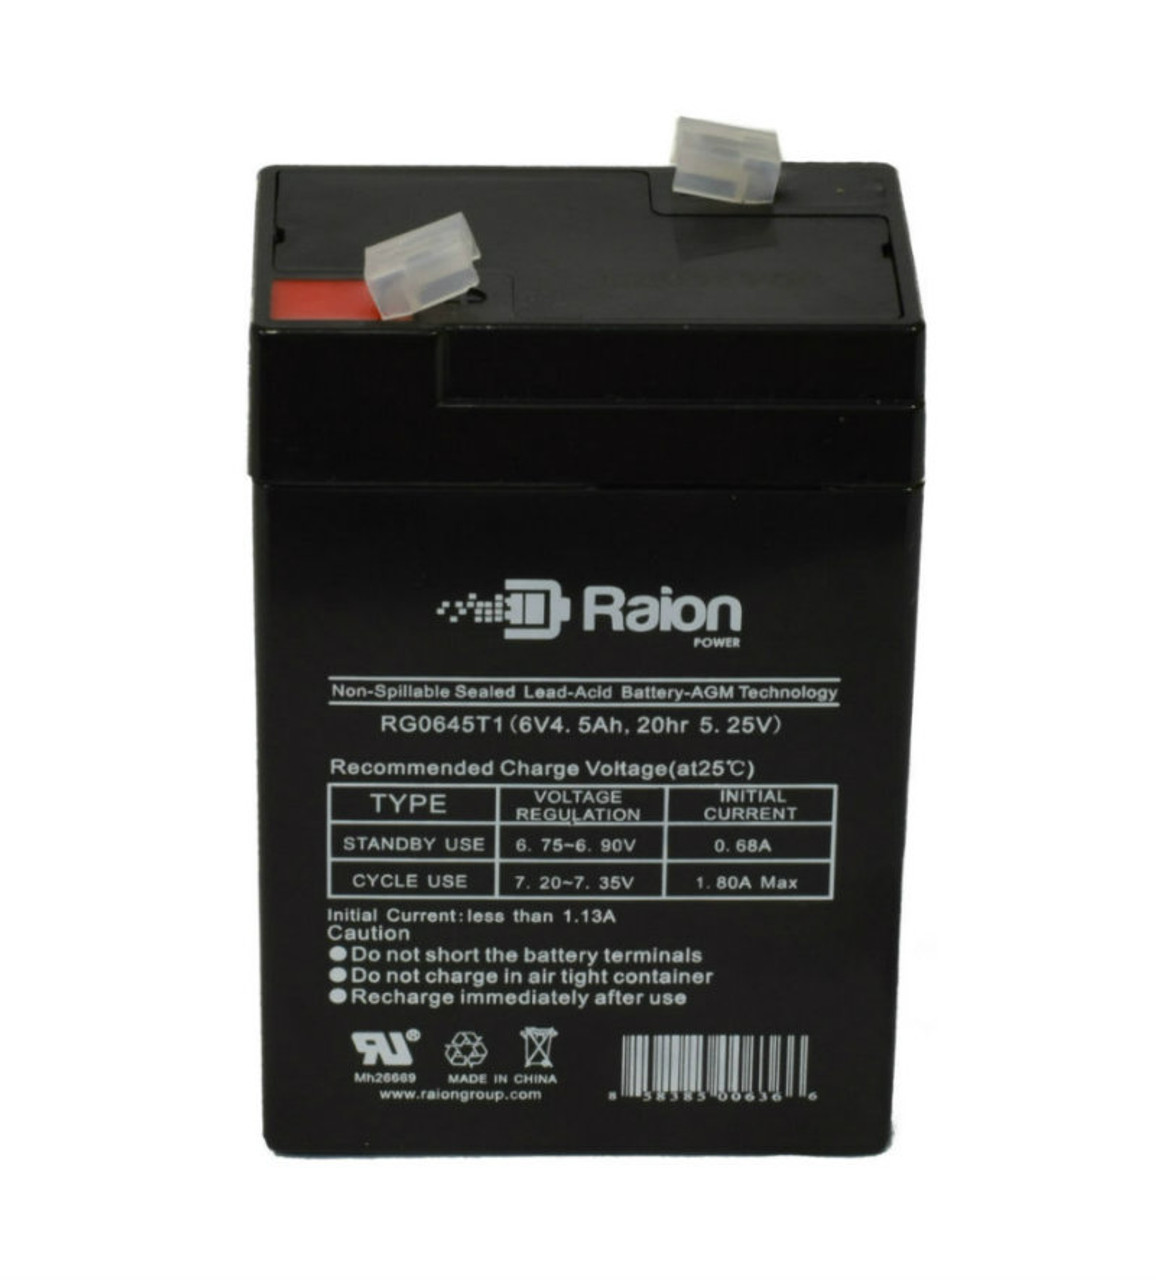 Raion Power RG0645T1 Replacement Battery Cartridge for Motoma MS6V4.5